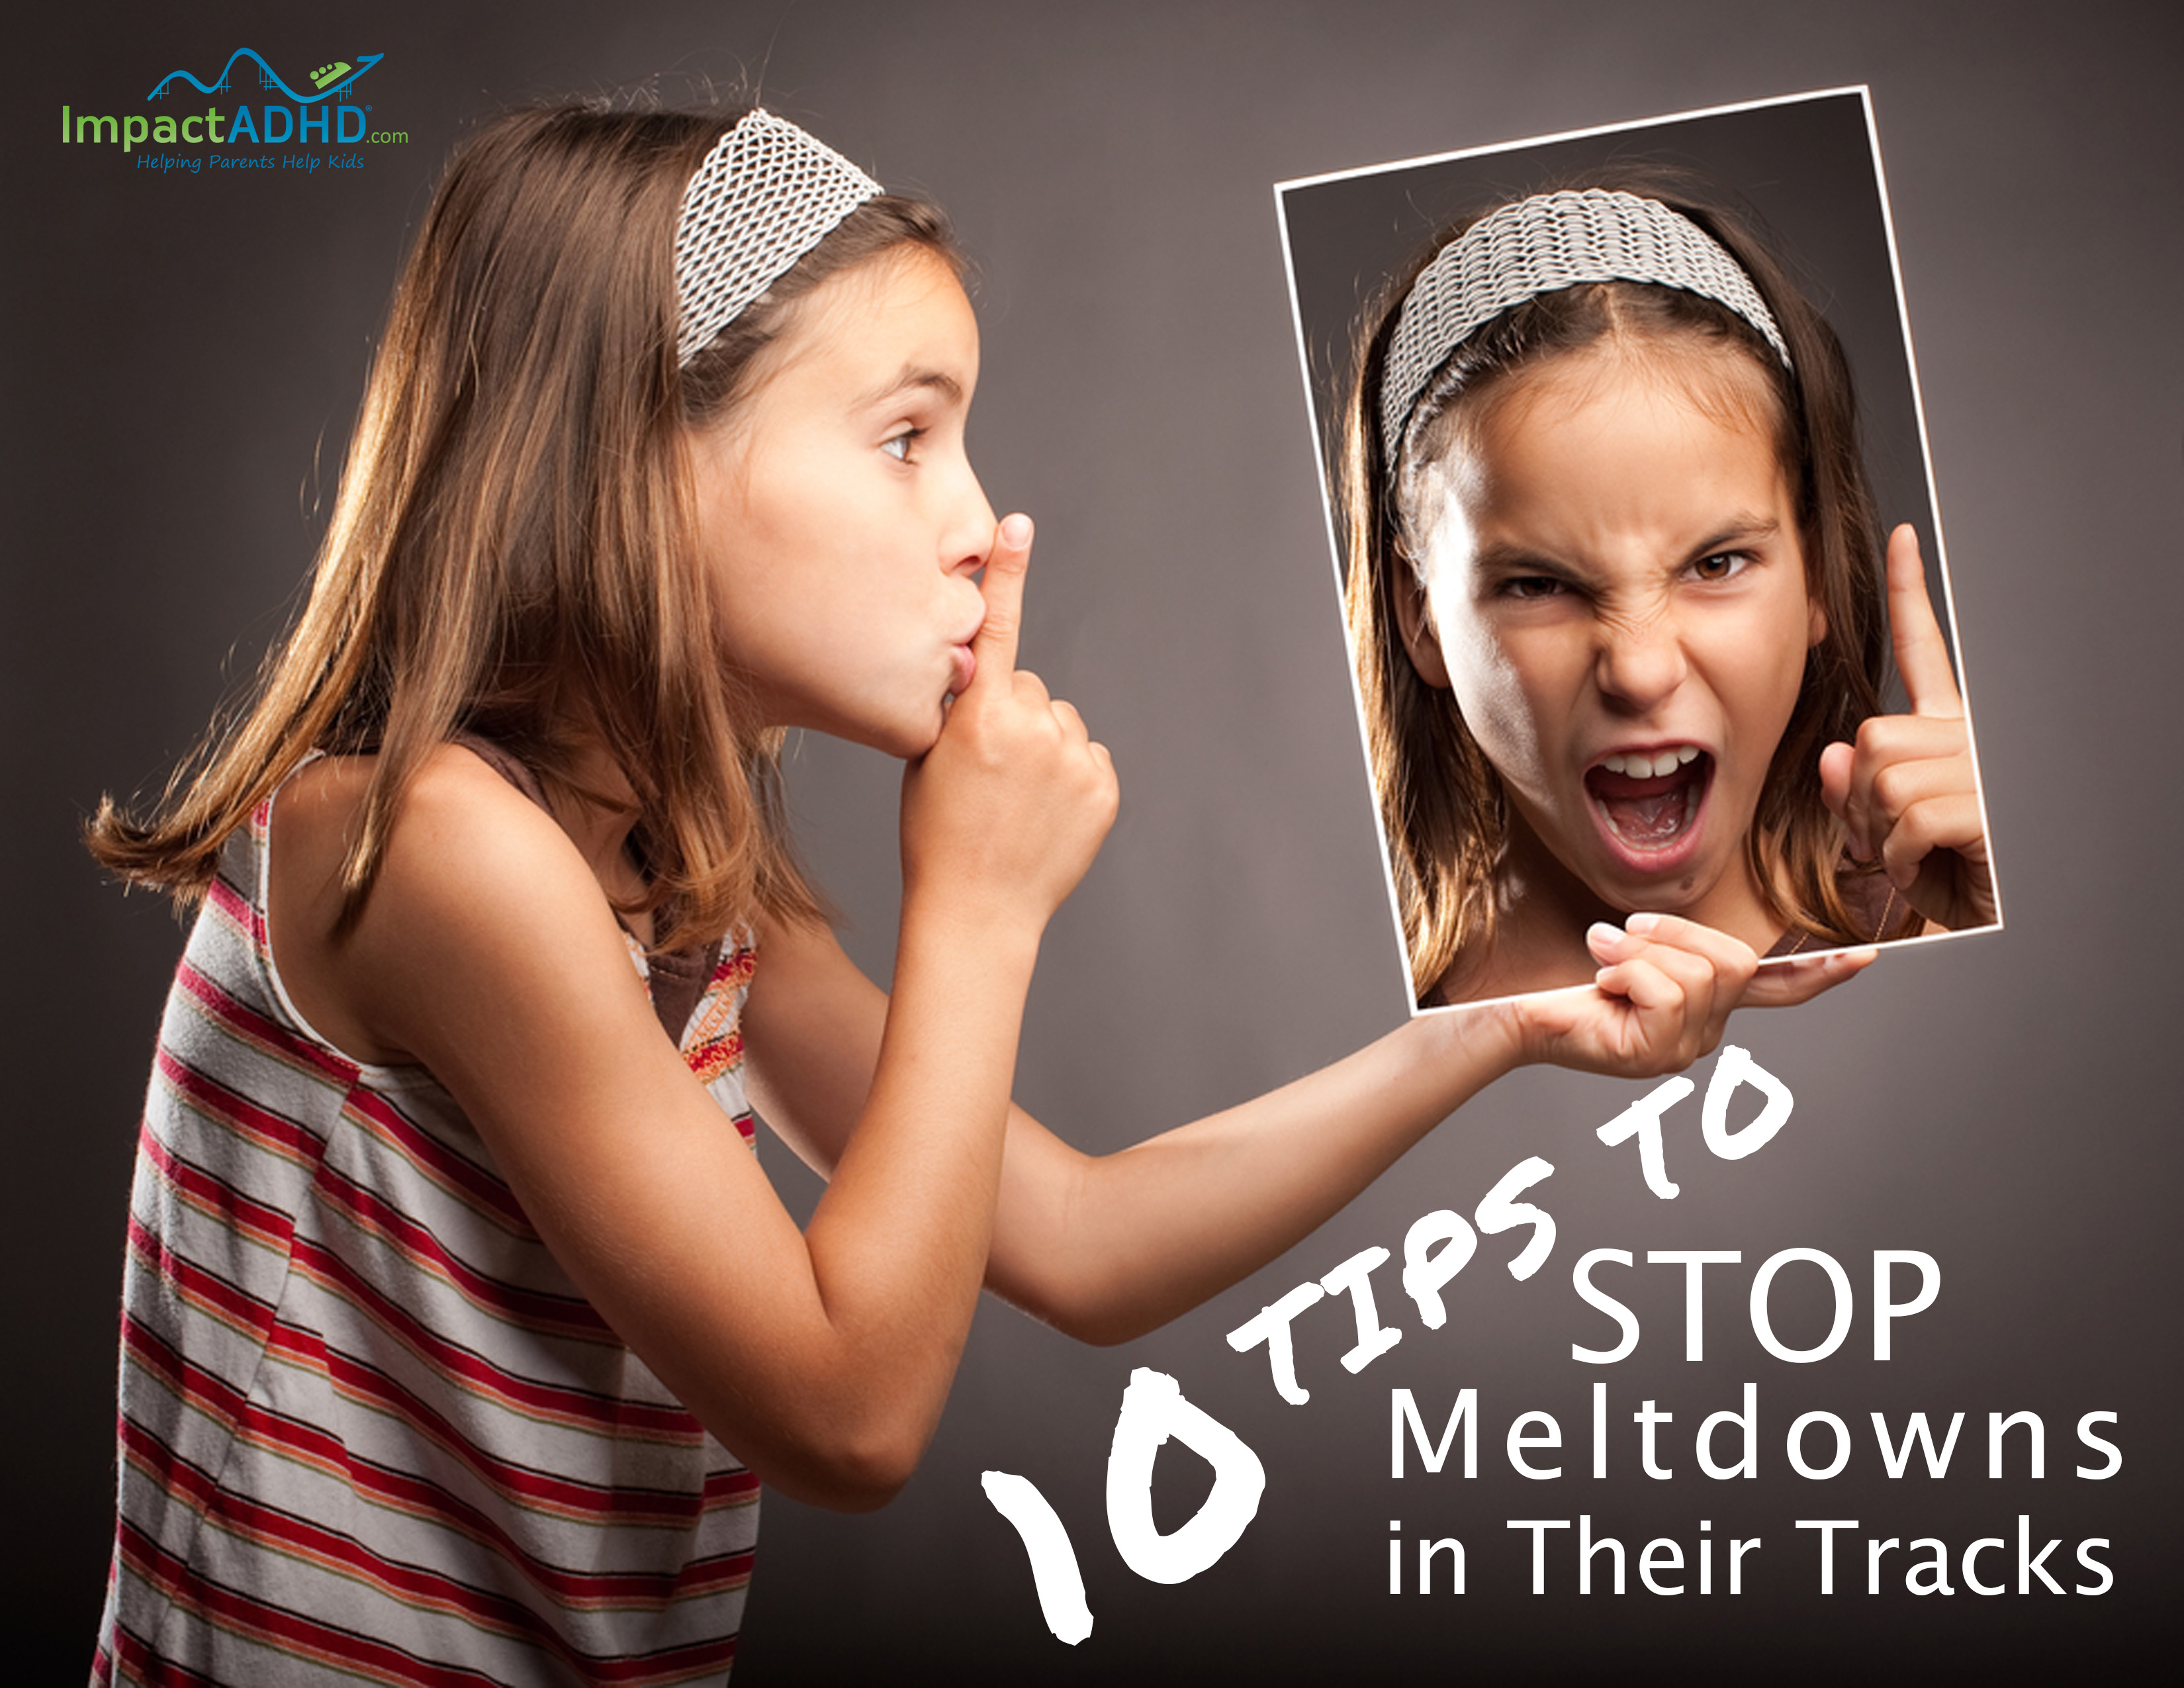 10-Tips-to-Stop-Meltdowns-in-Their-Tracks-2016_Page_1-1